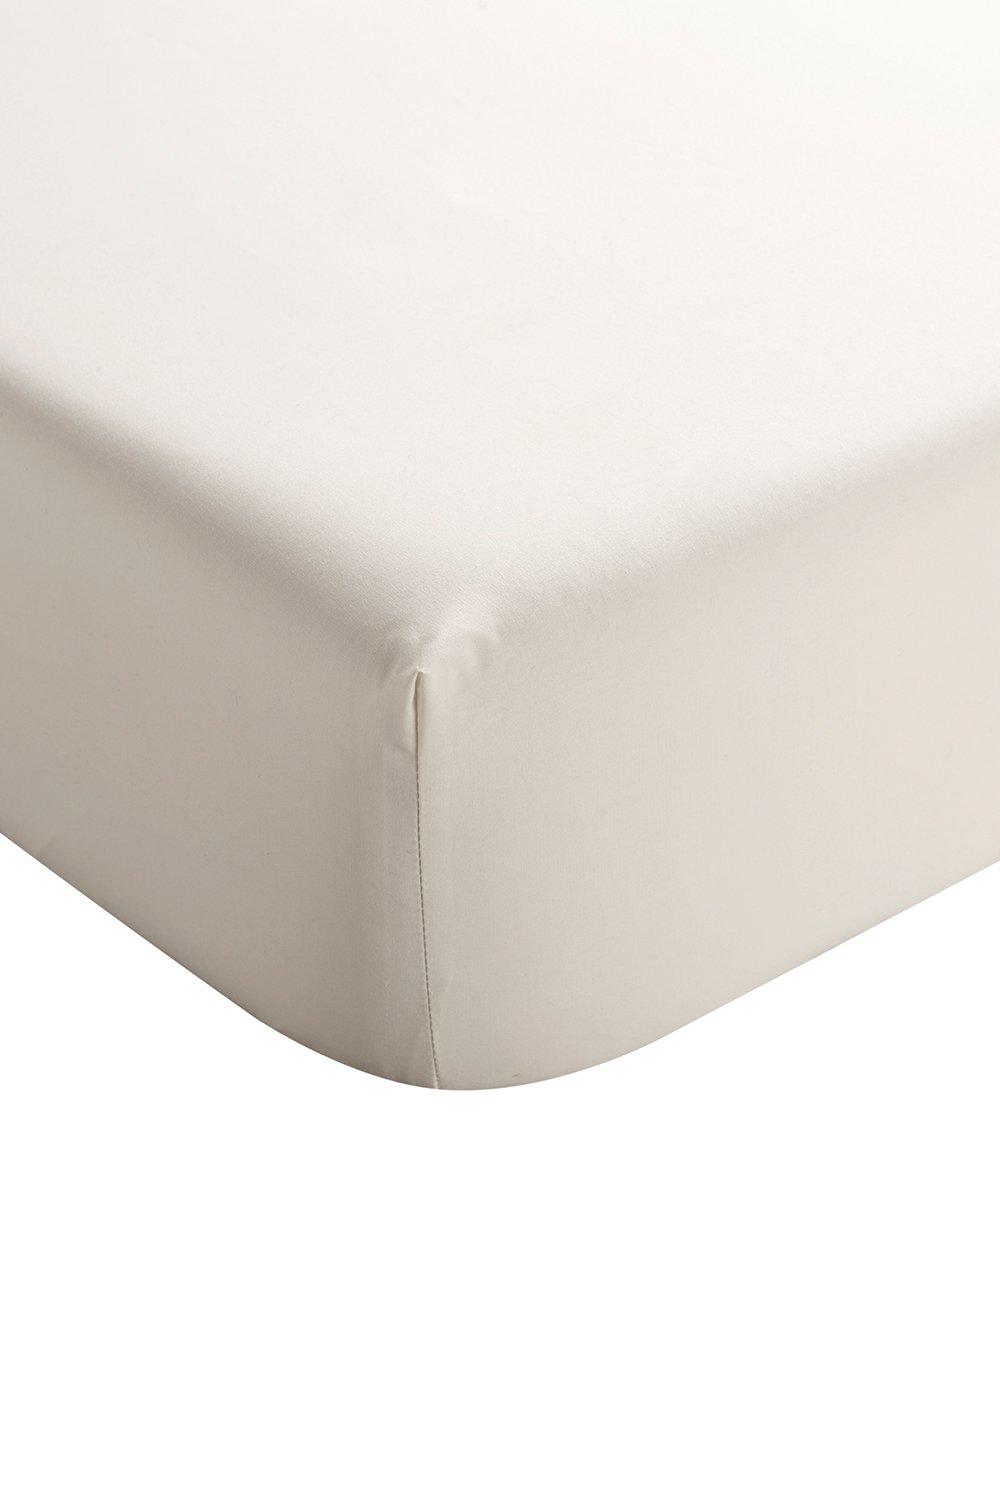 Christy 400TC Luxury Cotton Sateen Plain Dye Bedding Fitted Sheets